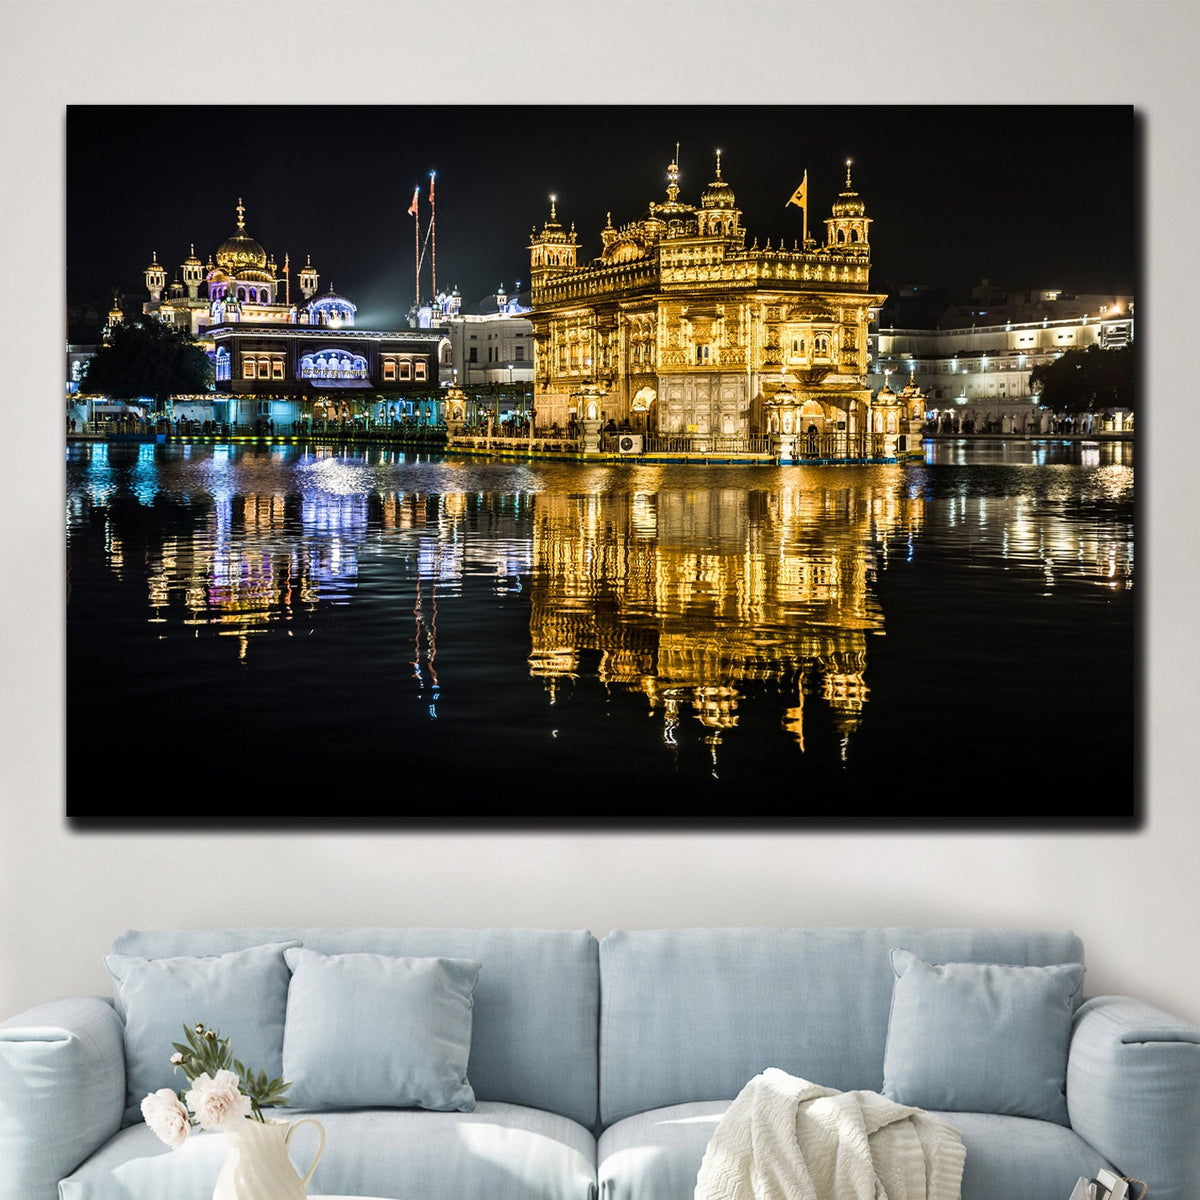 https://cdn.shopify.com/s/files/1/0387/9986/8044/products/TheMajesticGoldenTempleCanvasArtprintStretched-3.jpg